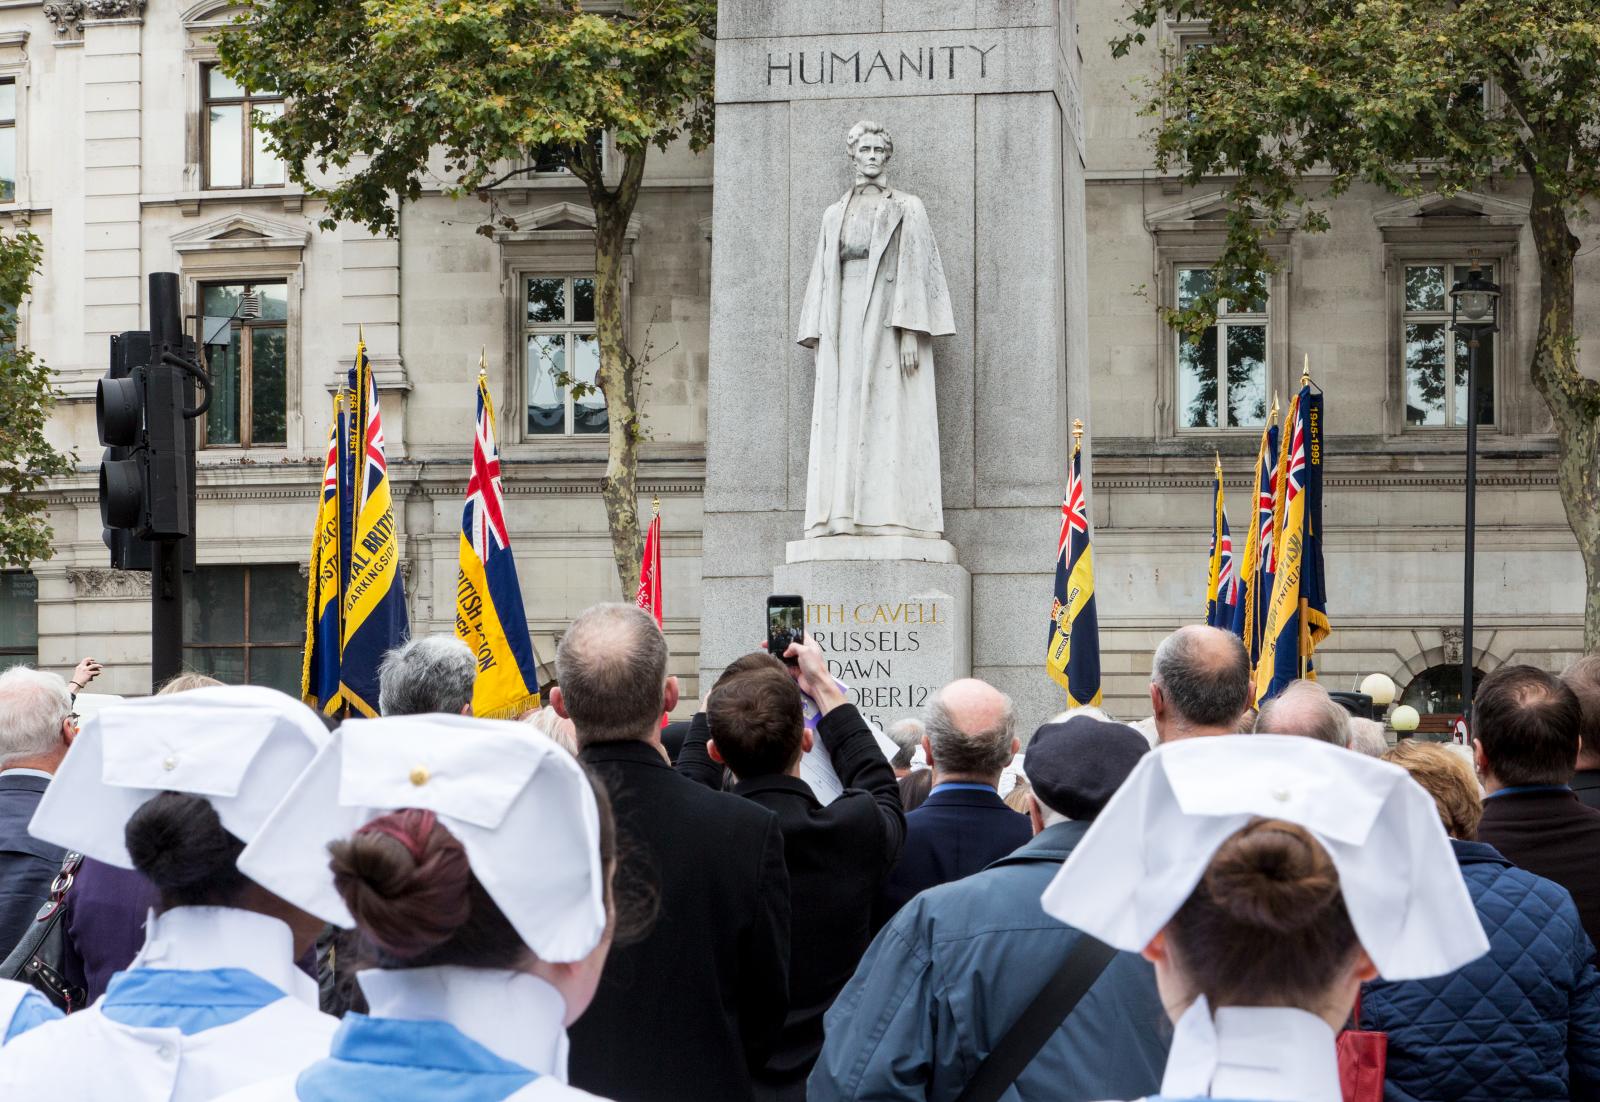 Crowds gathered in front of Edith Cavell memorial. Some are nurses in uniform.